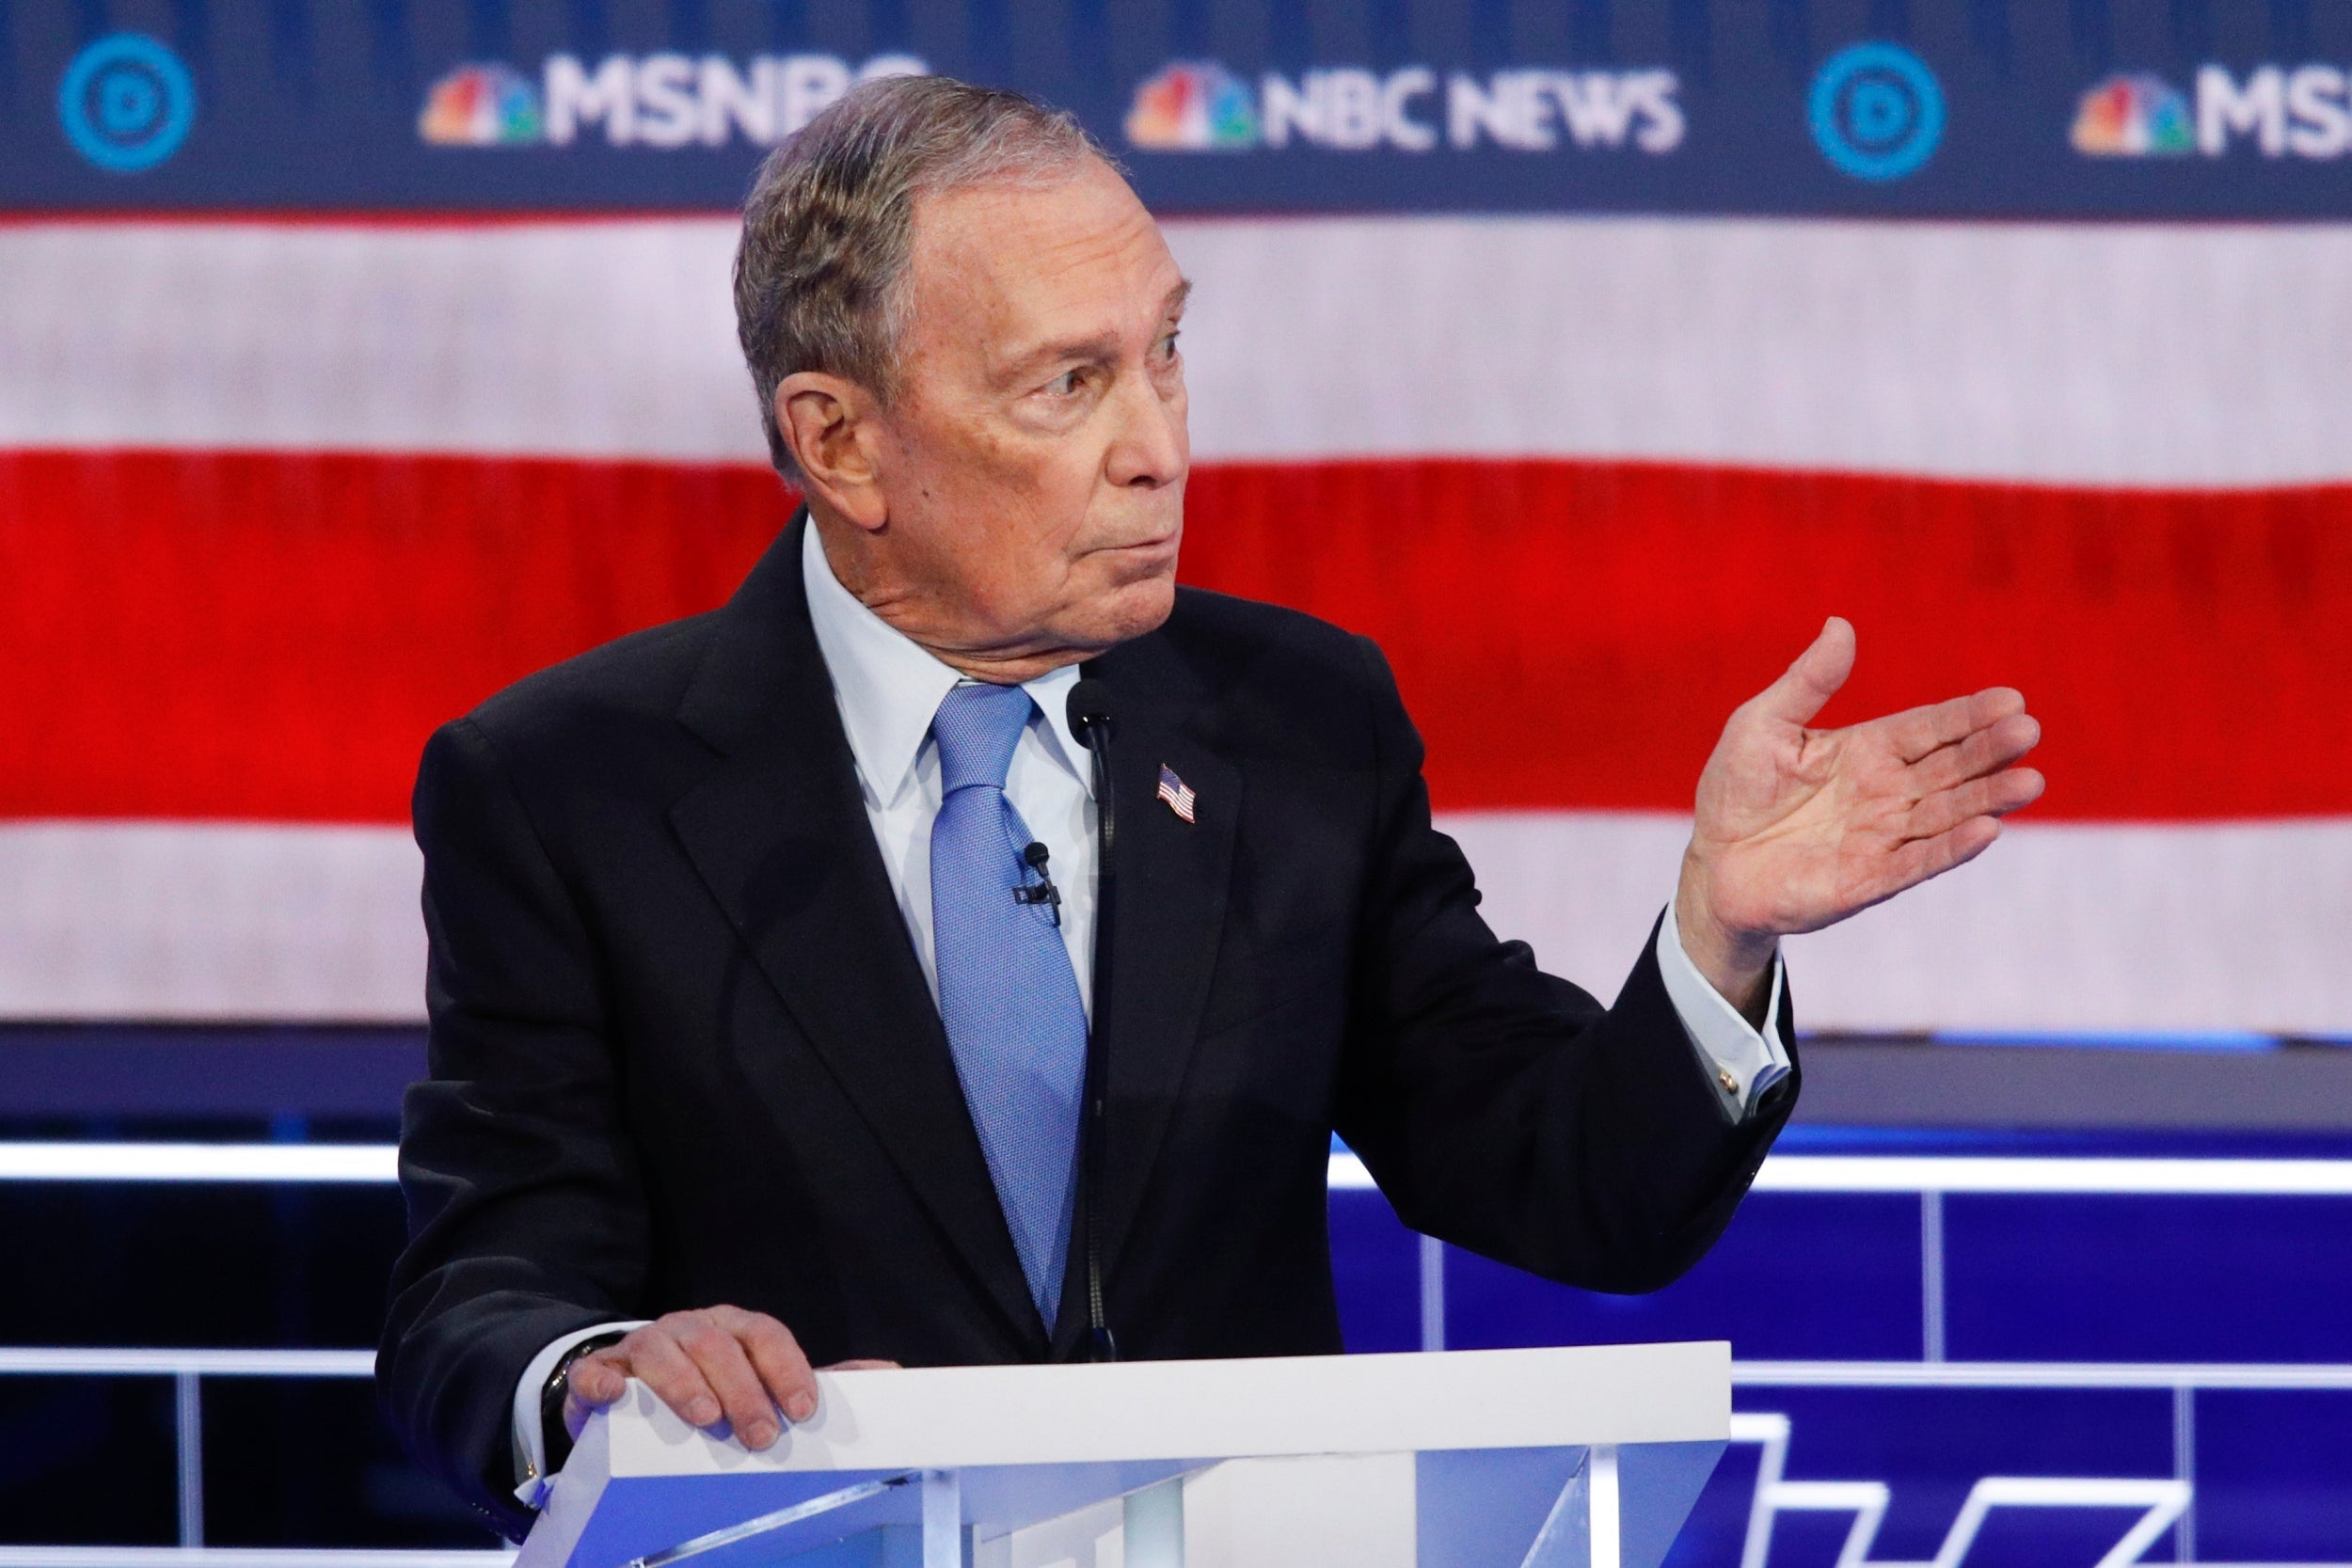 Mike Bloomberg accused of editing debate clip to make it look like he silenced his rivals